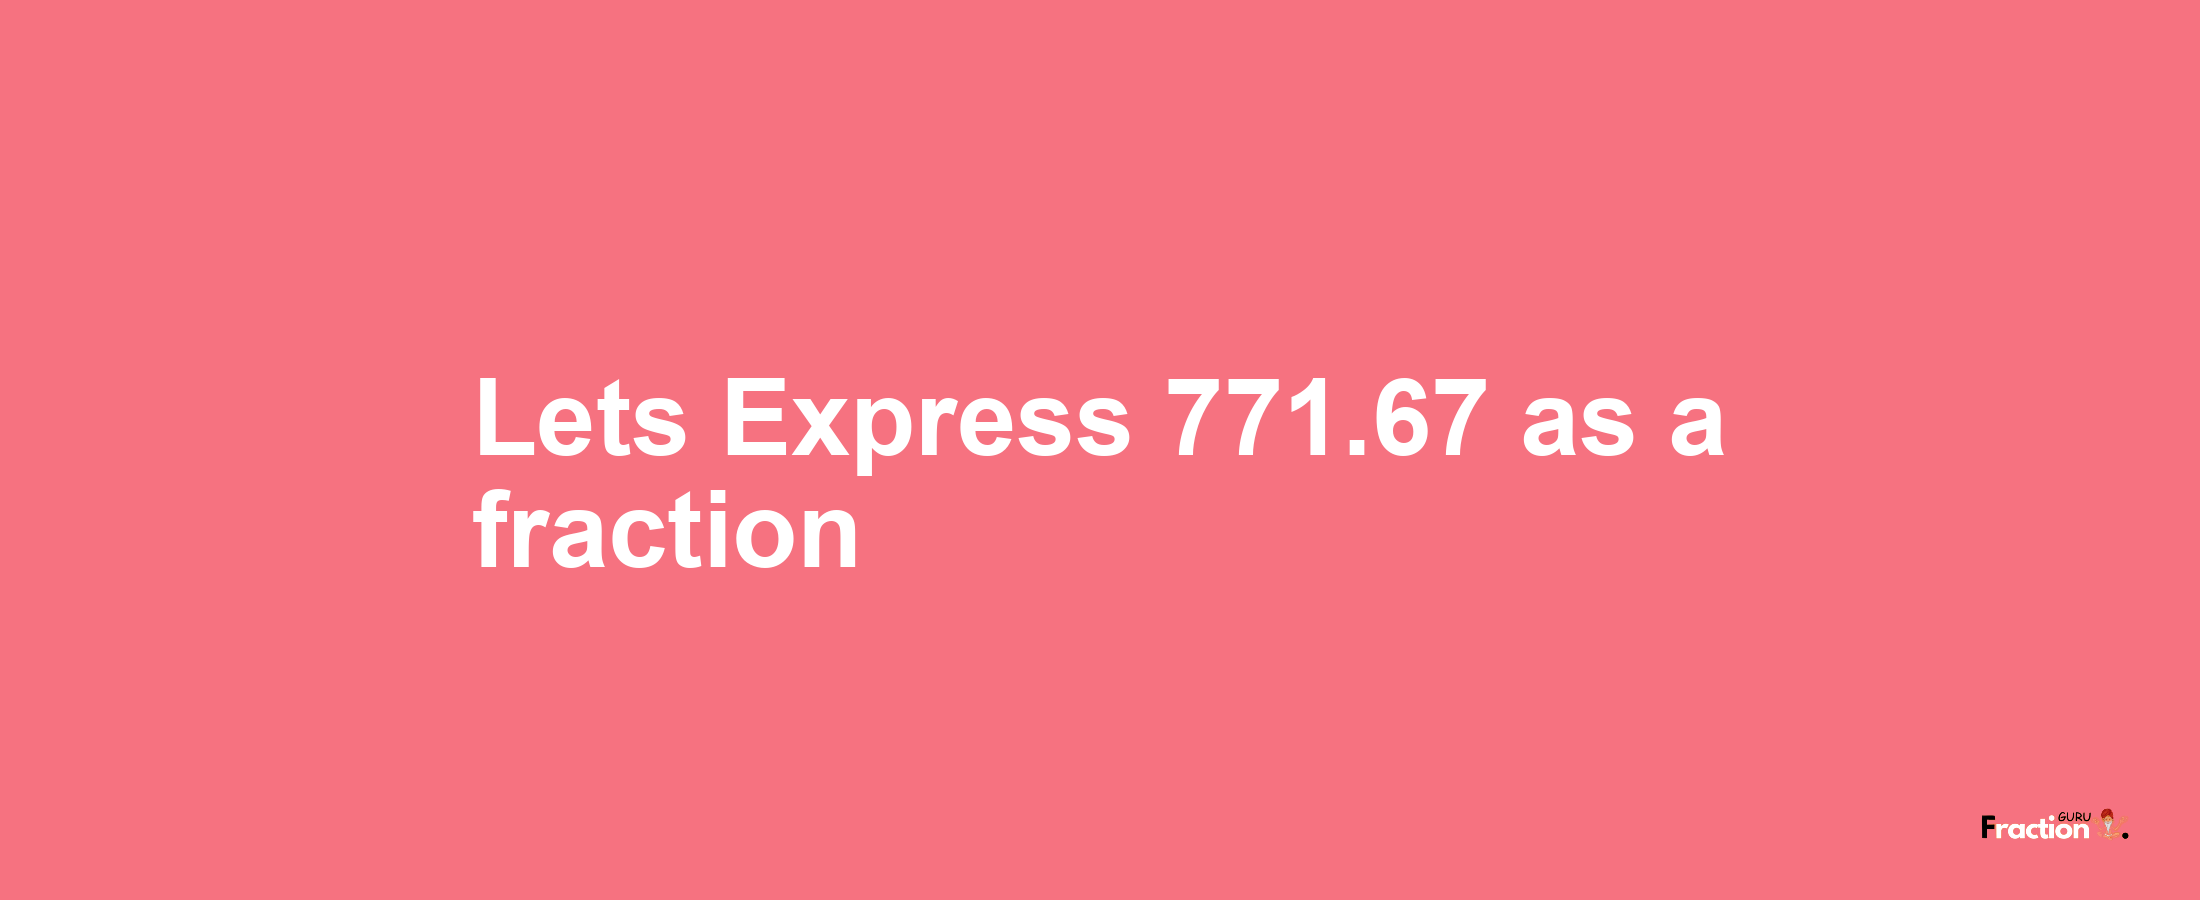 Lets Express 771.67 as afraction